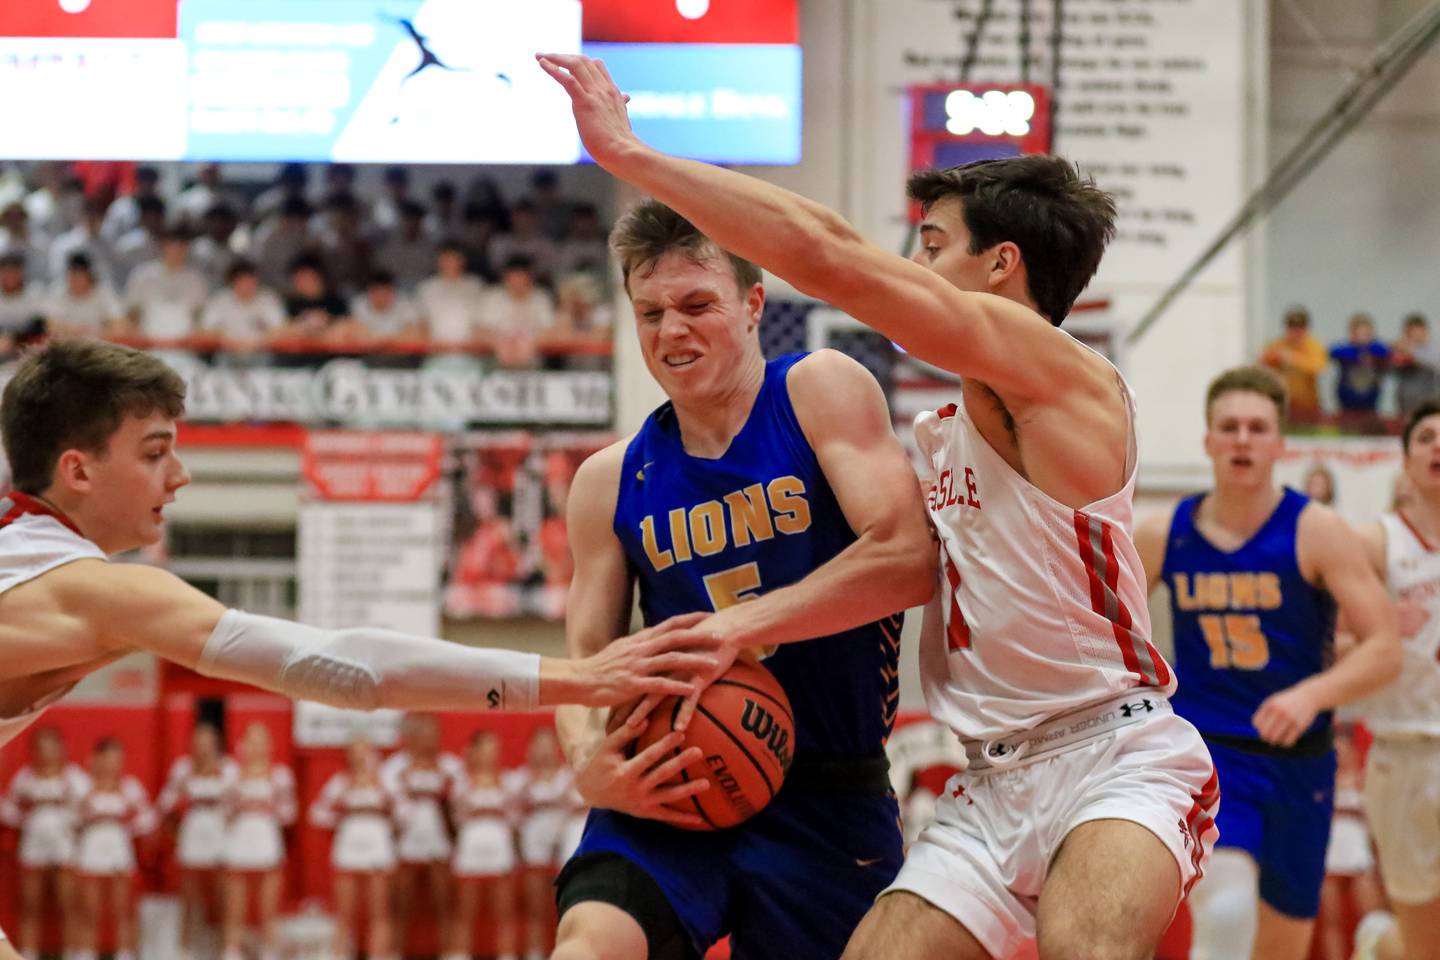 Lyons Jackson Niego (5) holds onto the ball while Hinsdale Central's Ben Oosterbaan (12) attempts a steal during varsity basketball game between Lyons at Hinsdale Central.  Jan 20, 2023.